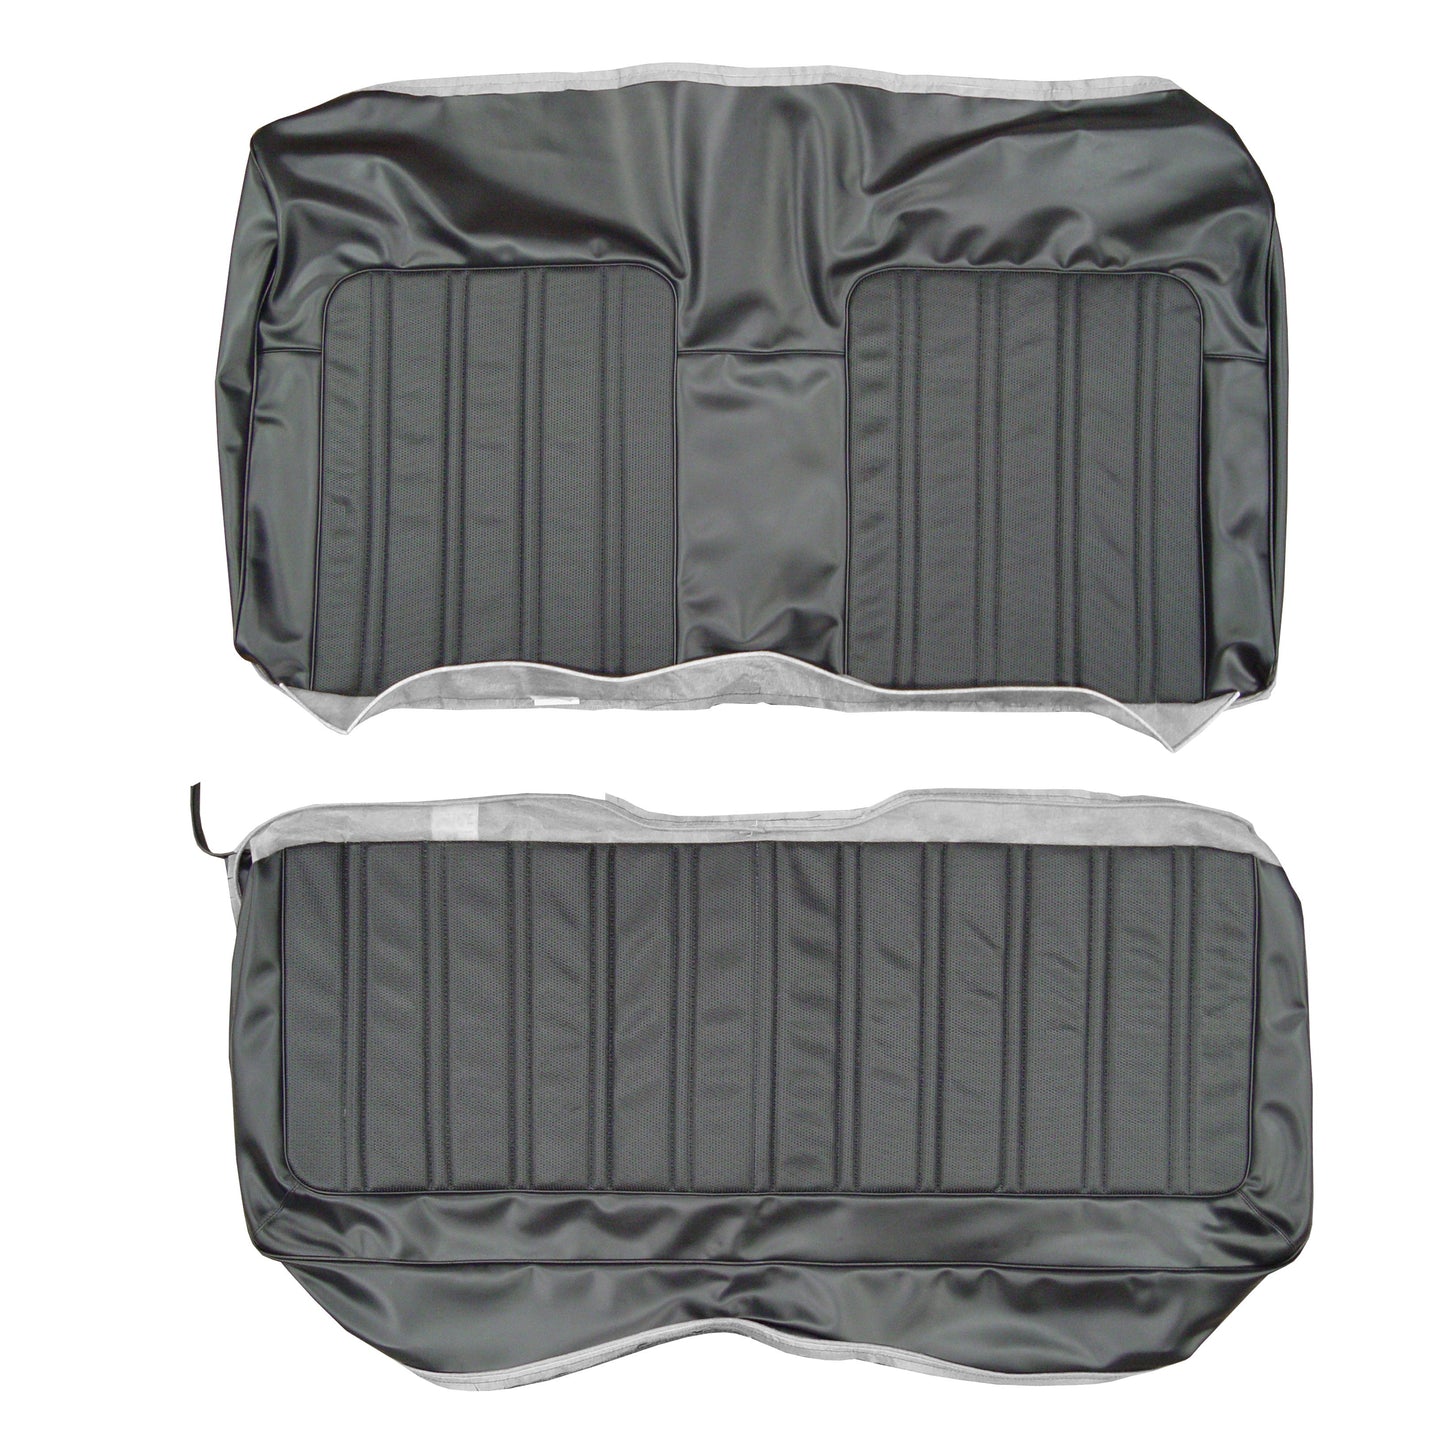 74 CHARGER REAR BENCH SEAT UPHOLSTERY - BLACK